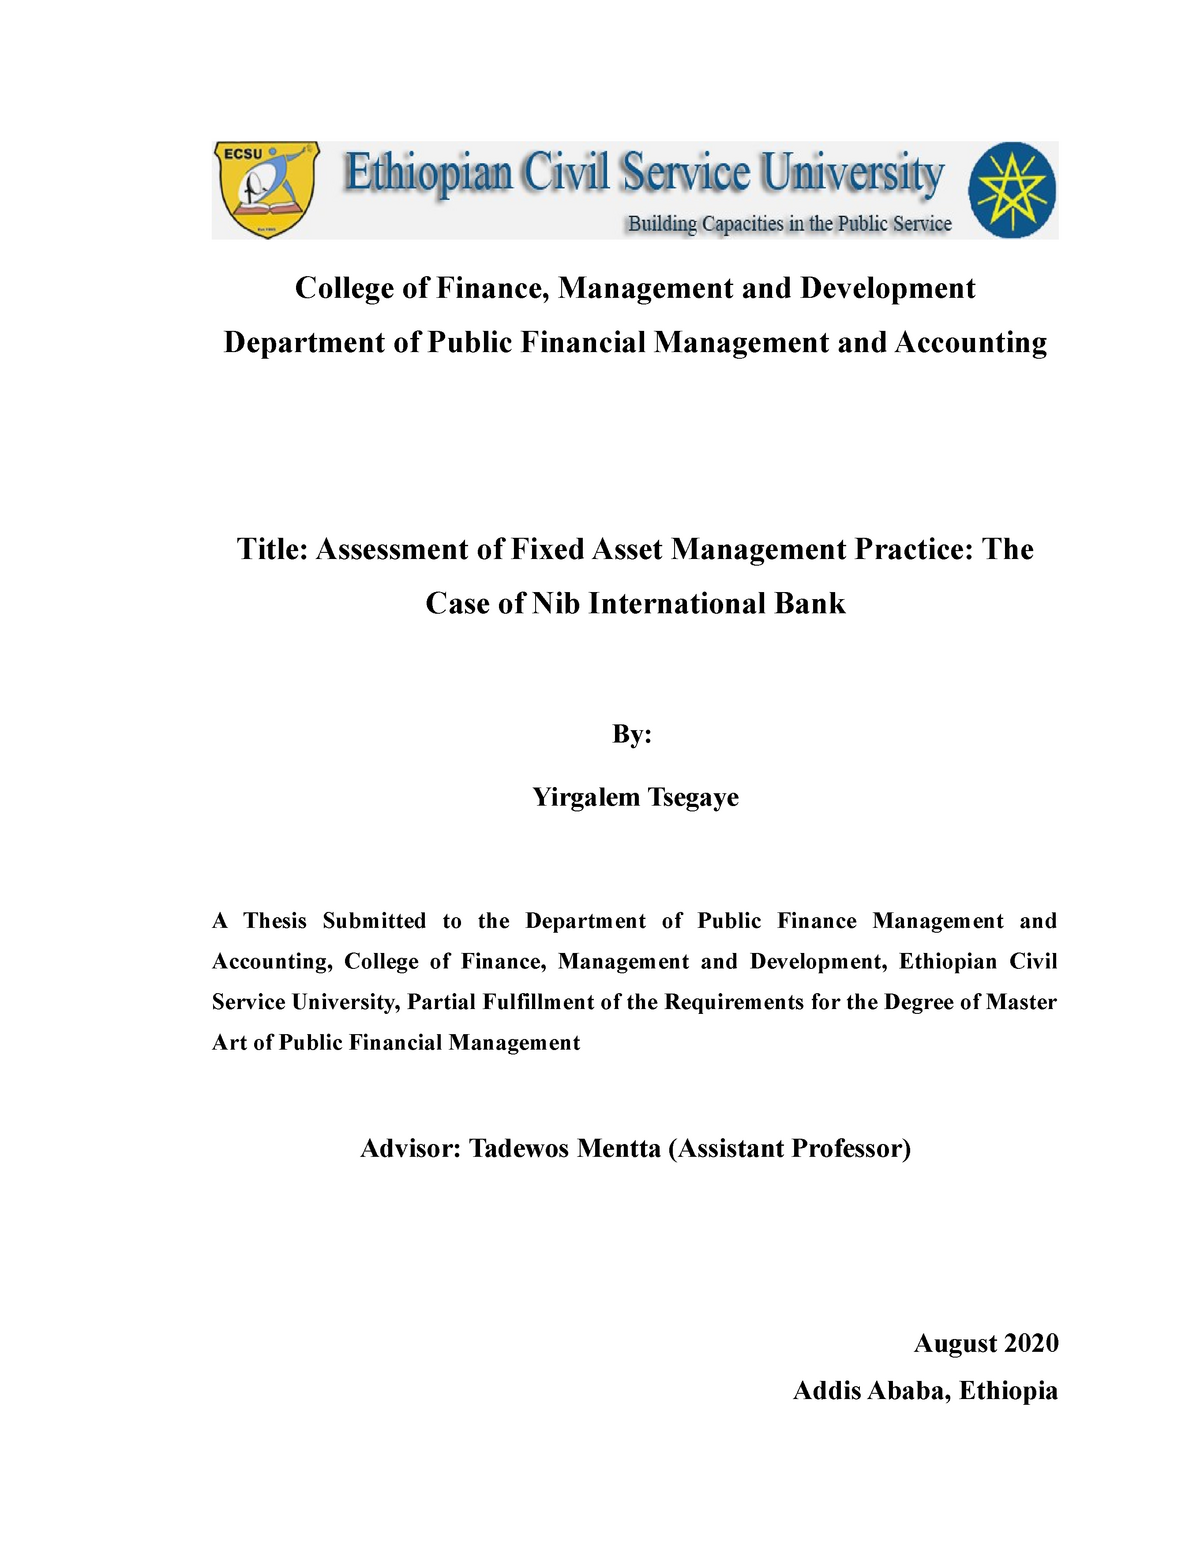 thesis title of financial management